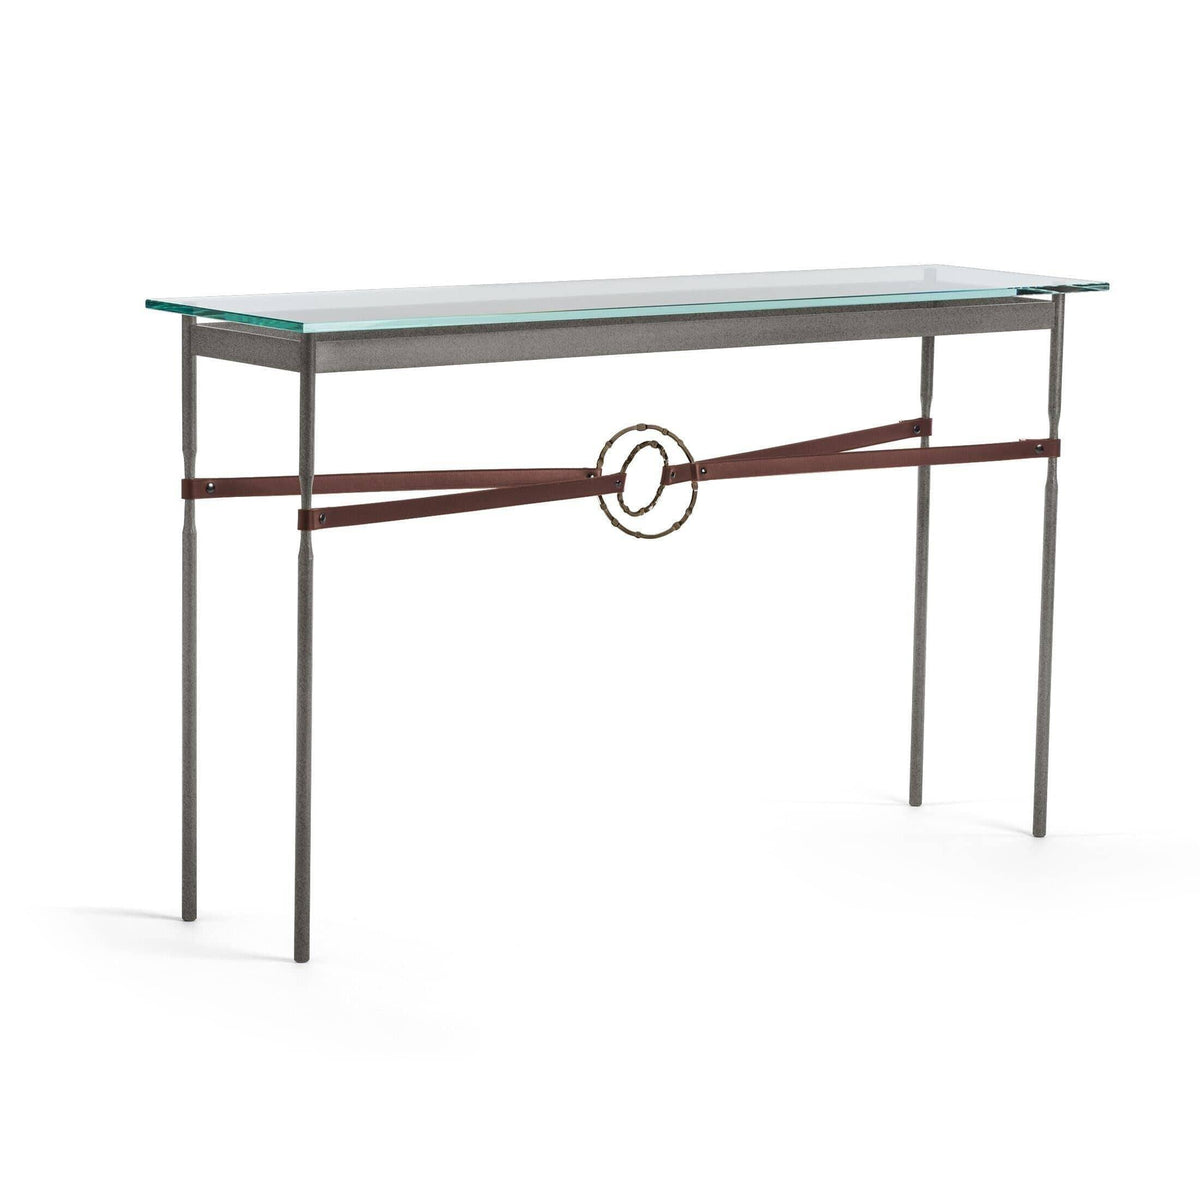 Hubbardton Forge - Equus Brown Leather Console Table - 750118-20-05-LB-VA0714 | Montreal Lighting & Hardware